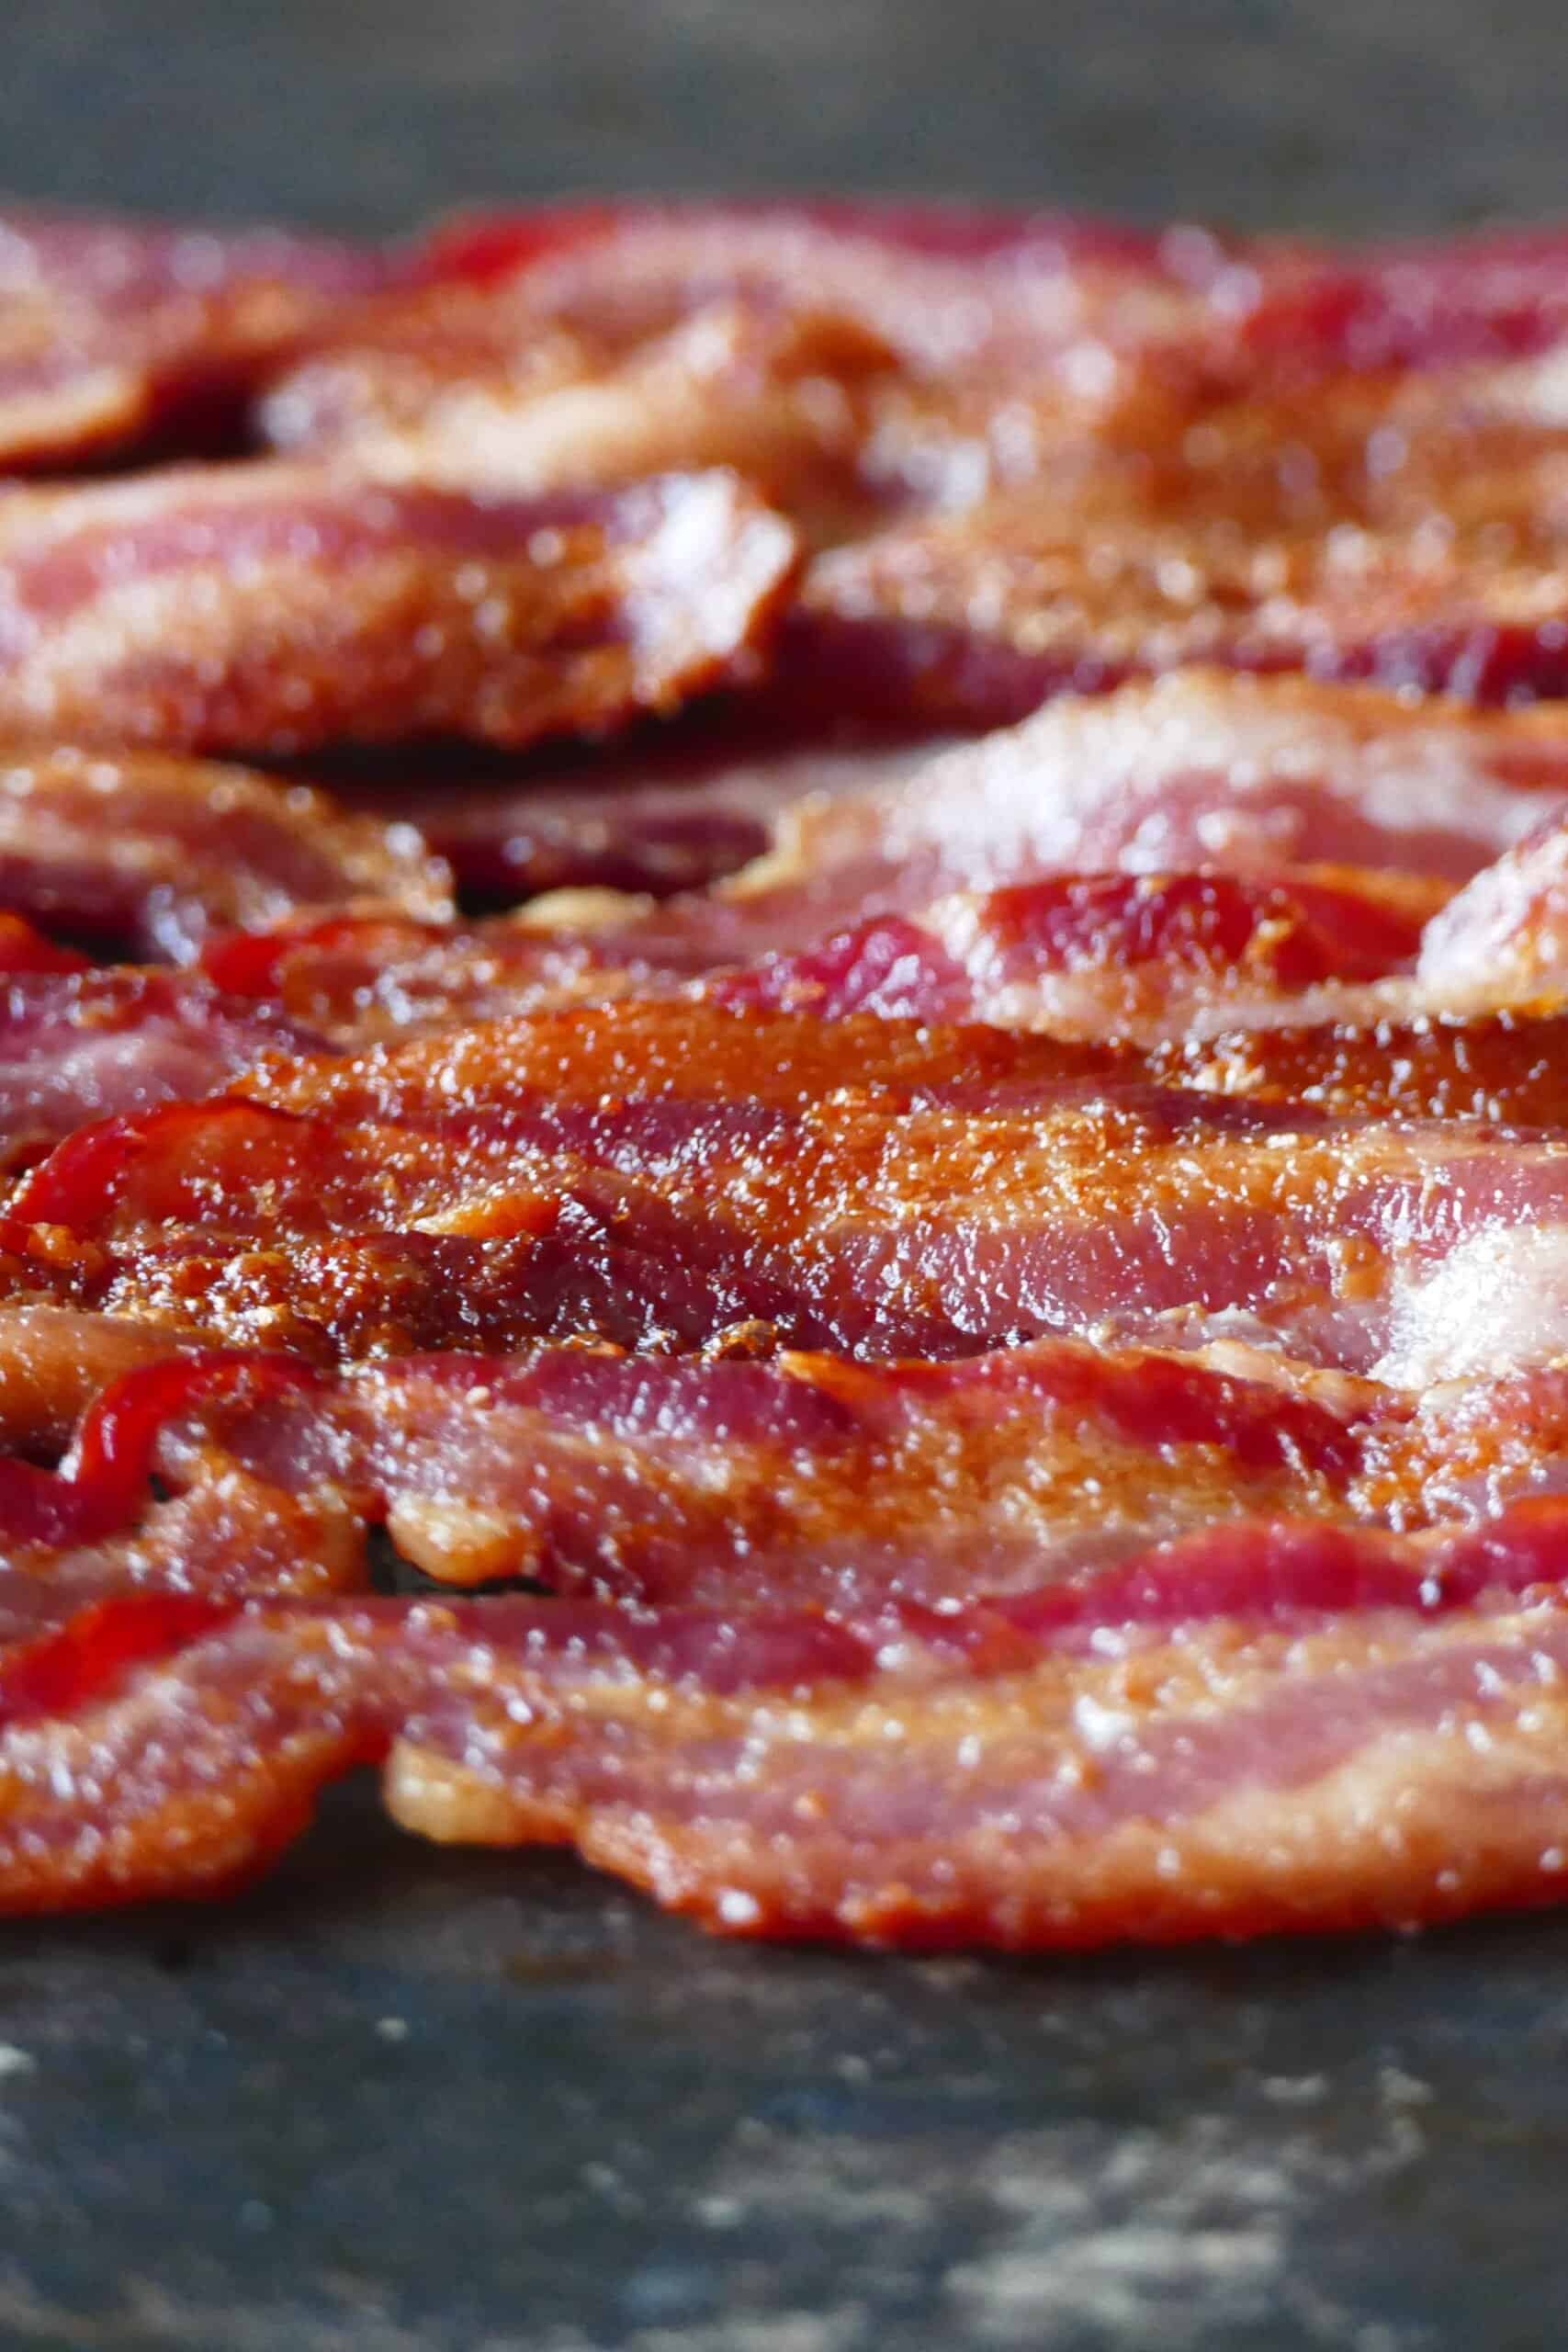 Air fryer bacon - Strips of cooked bacon on black background.